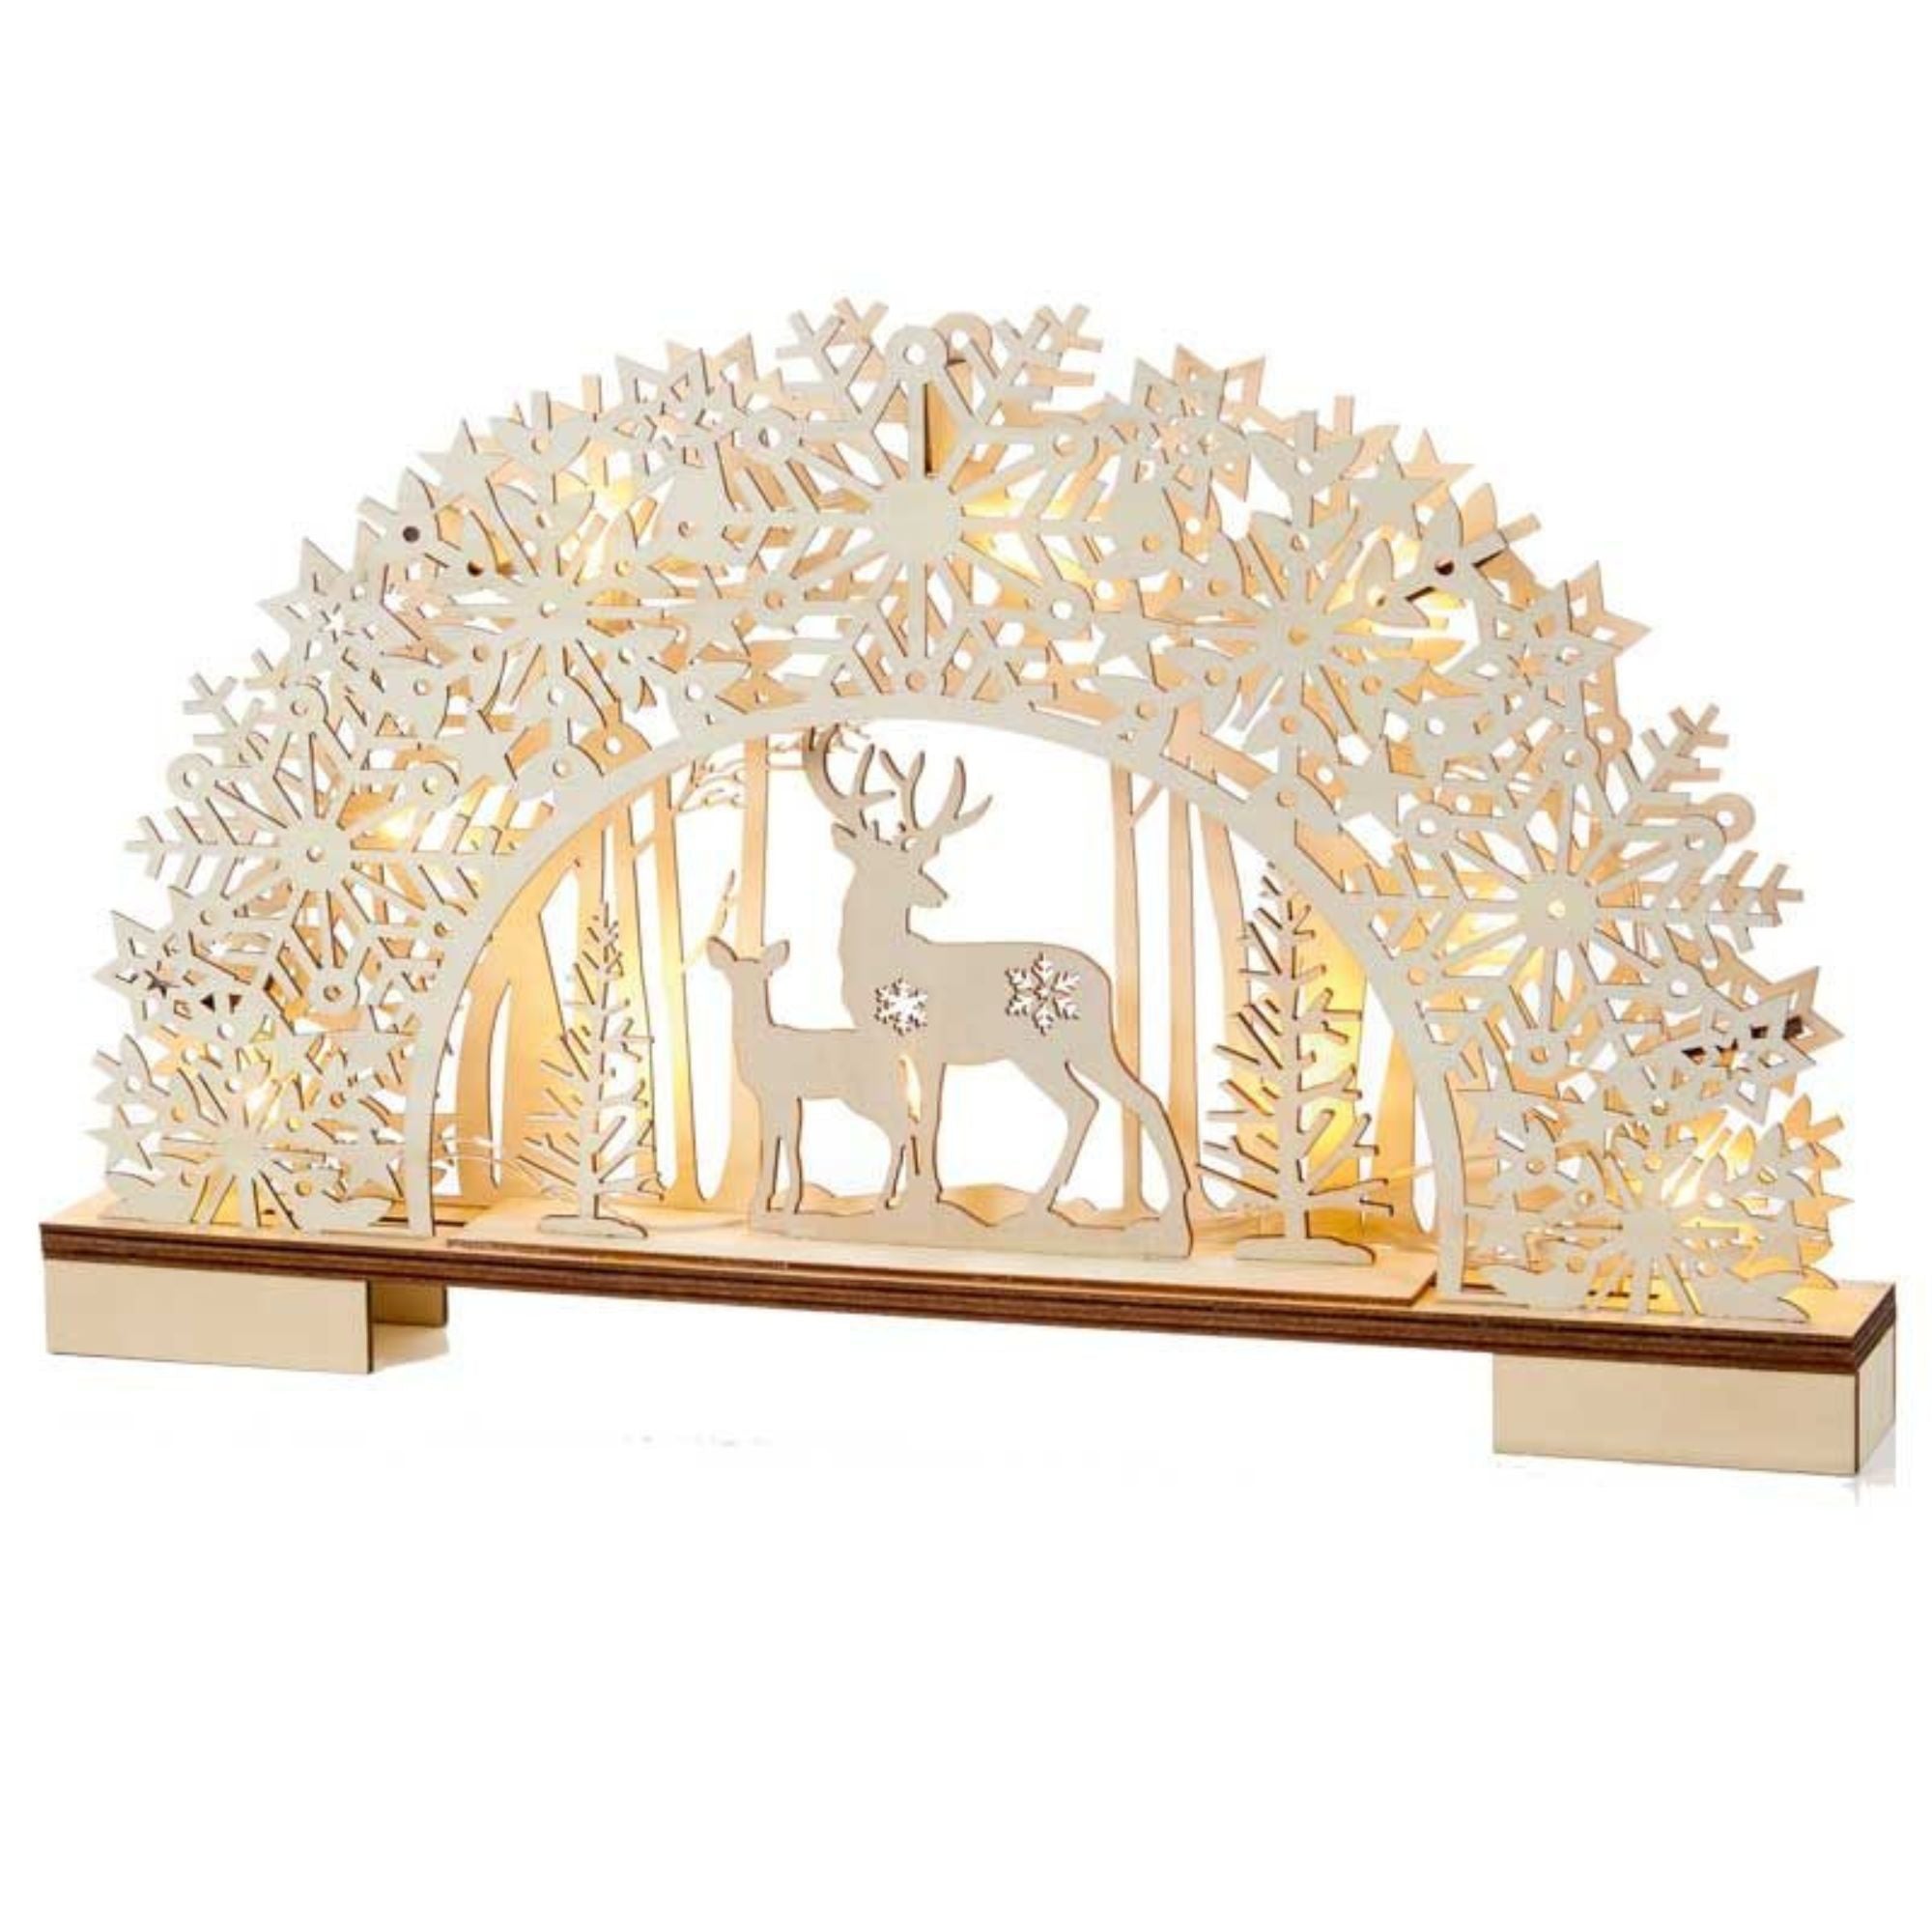 45cm Battery Operated Light up Wooden Christmas Deer with Snowflake Bridge & LEDs 